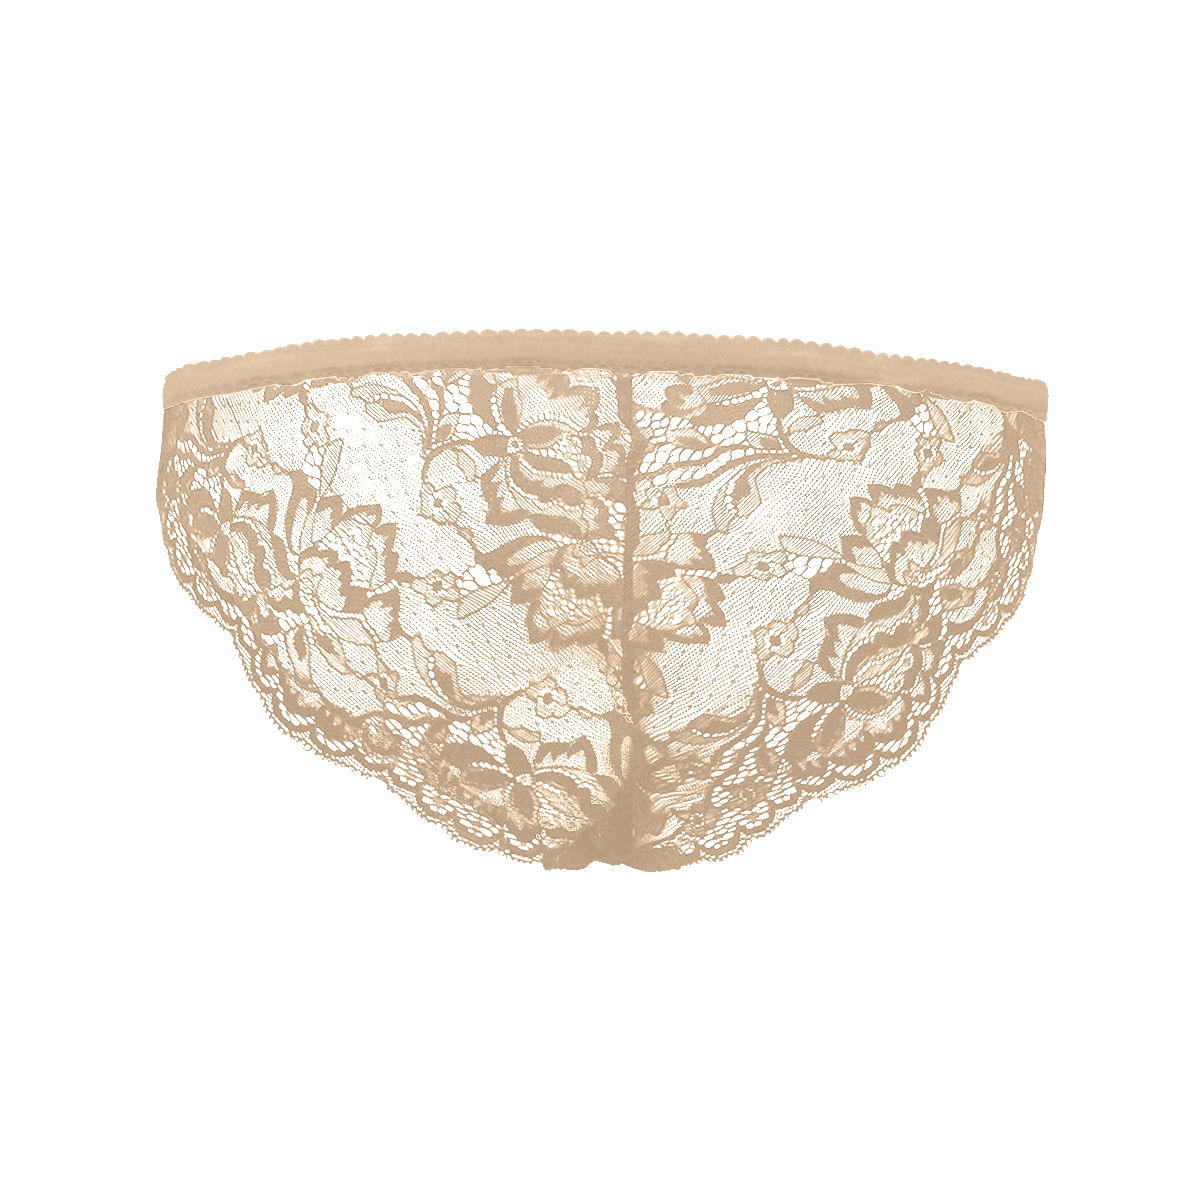 Peach And Green Floral Beige Women's Lace Panty (Model L41)